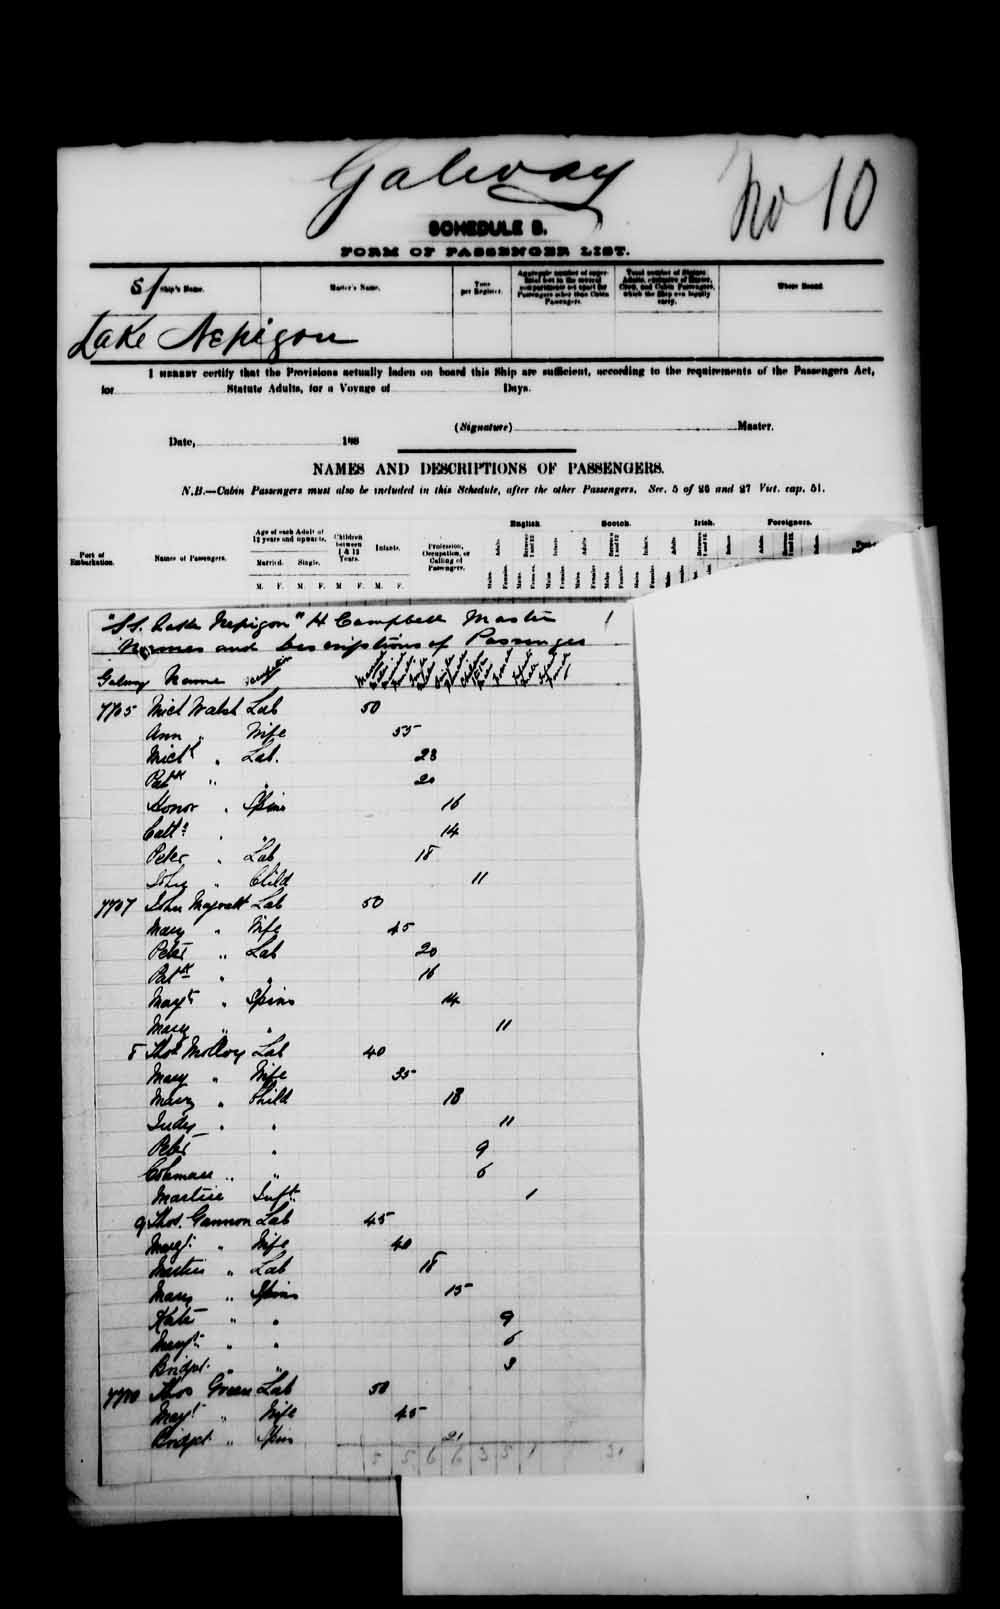 Digitized page of Passenger Lists for Image No.: e003541456